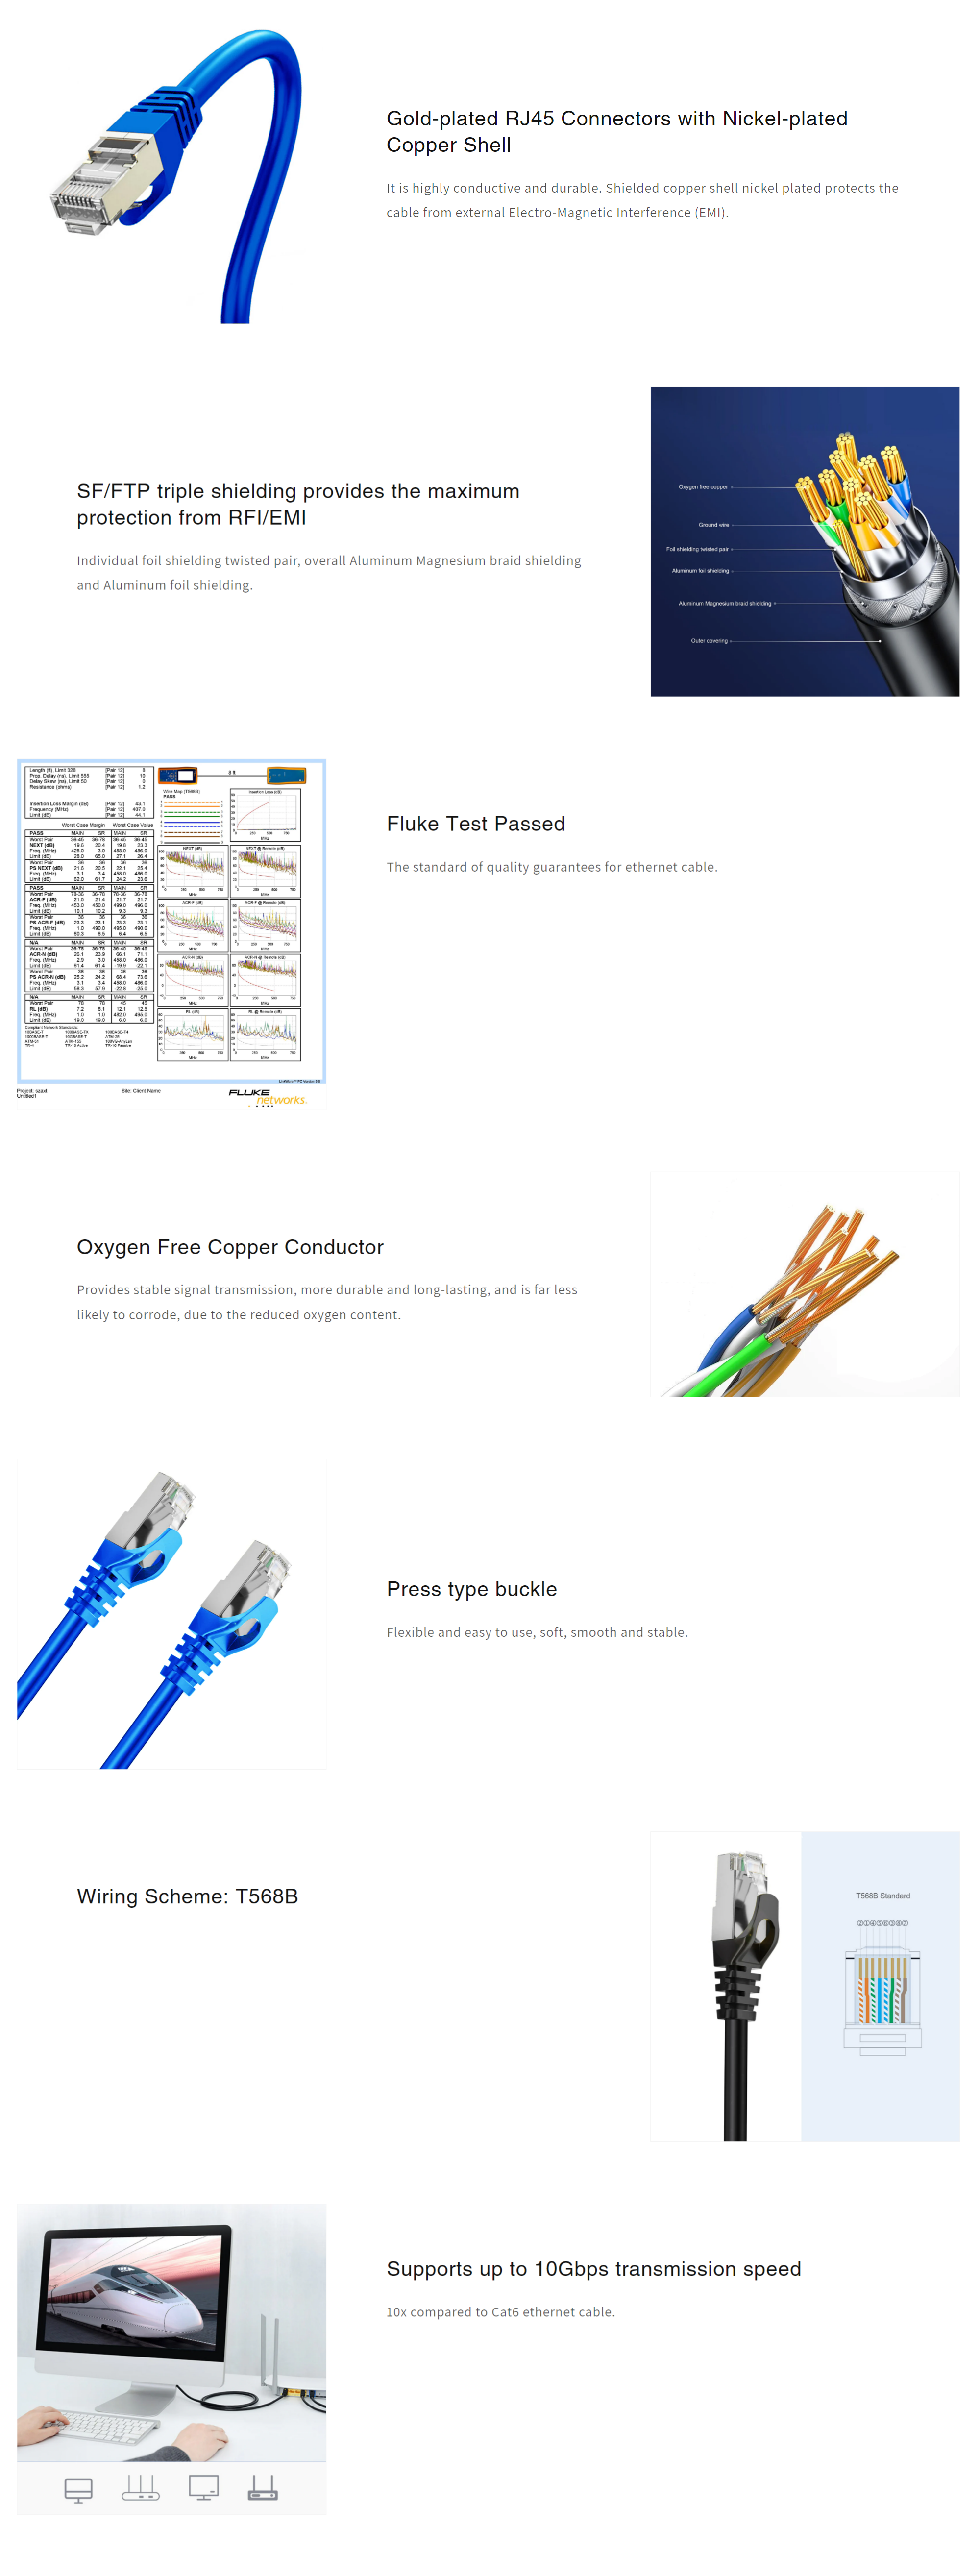 A large marketing image providing additional information about the product Cruxtec Cat7 15m 10GbE SF/FTP Triple Shielding Network Cable Blue - Additional alt info not provided